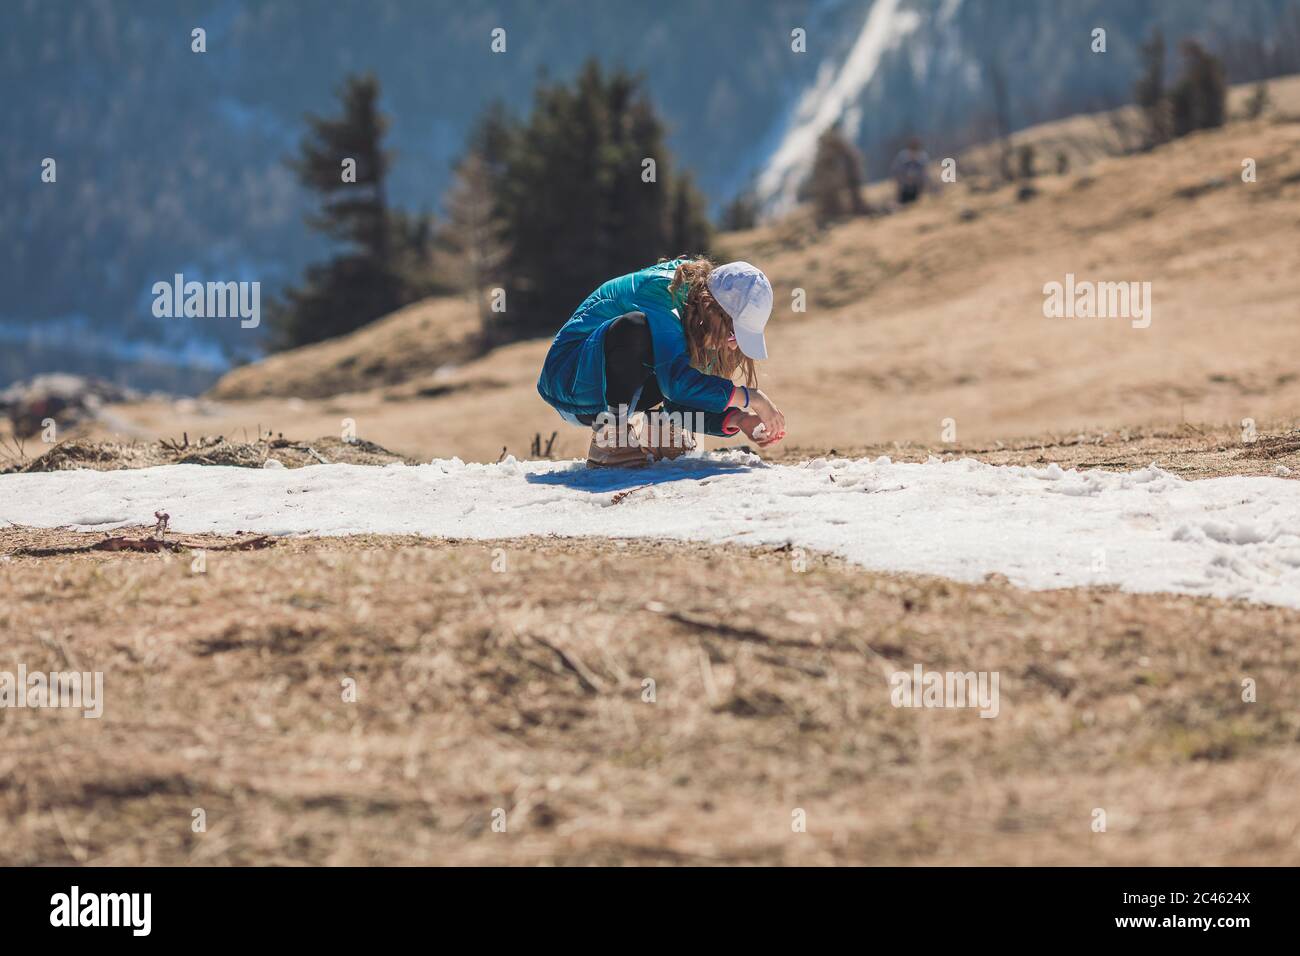 Young girl, tween age, wearing sun cap and sunglasses playing with melting snow in alpine scenery Stock Photo